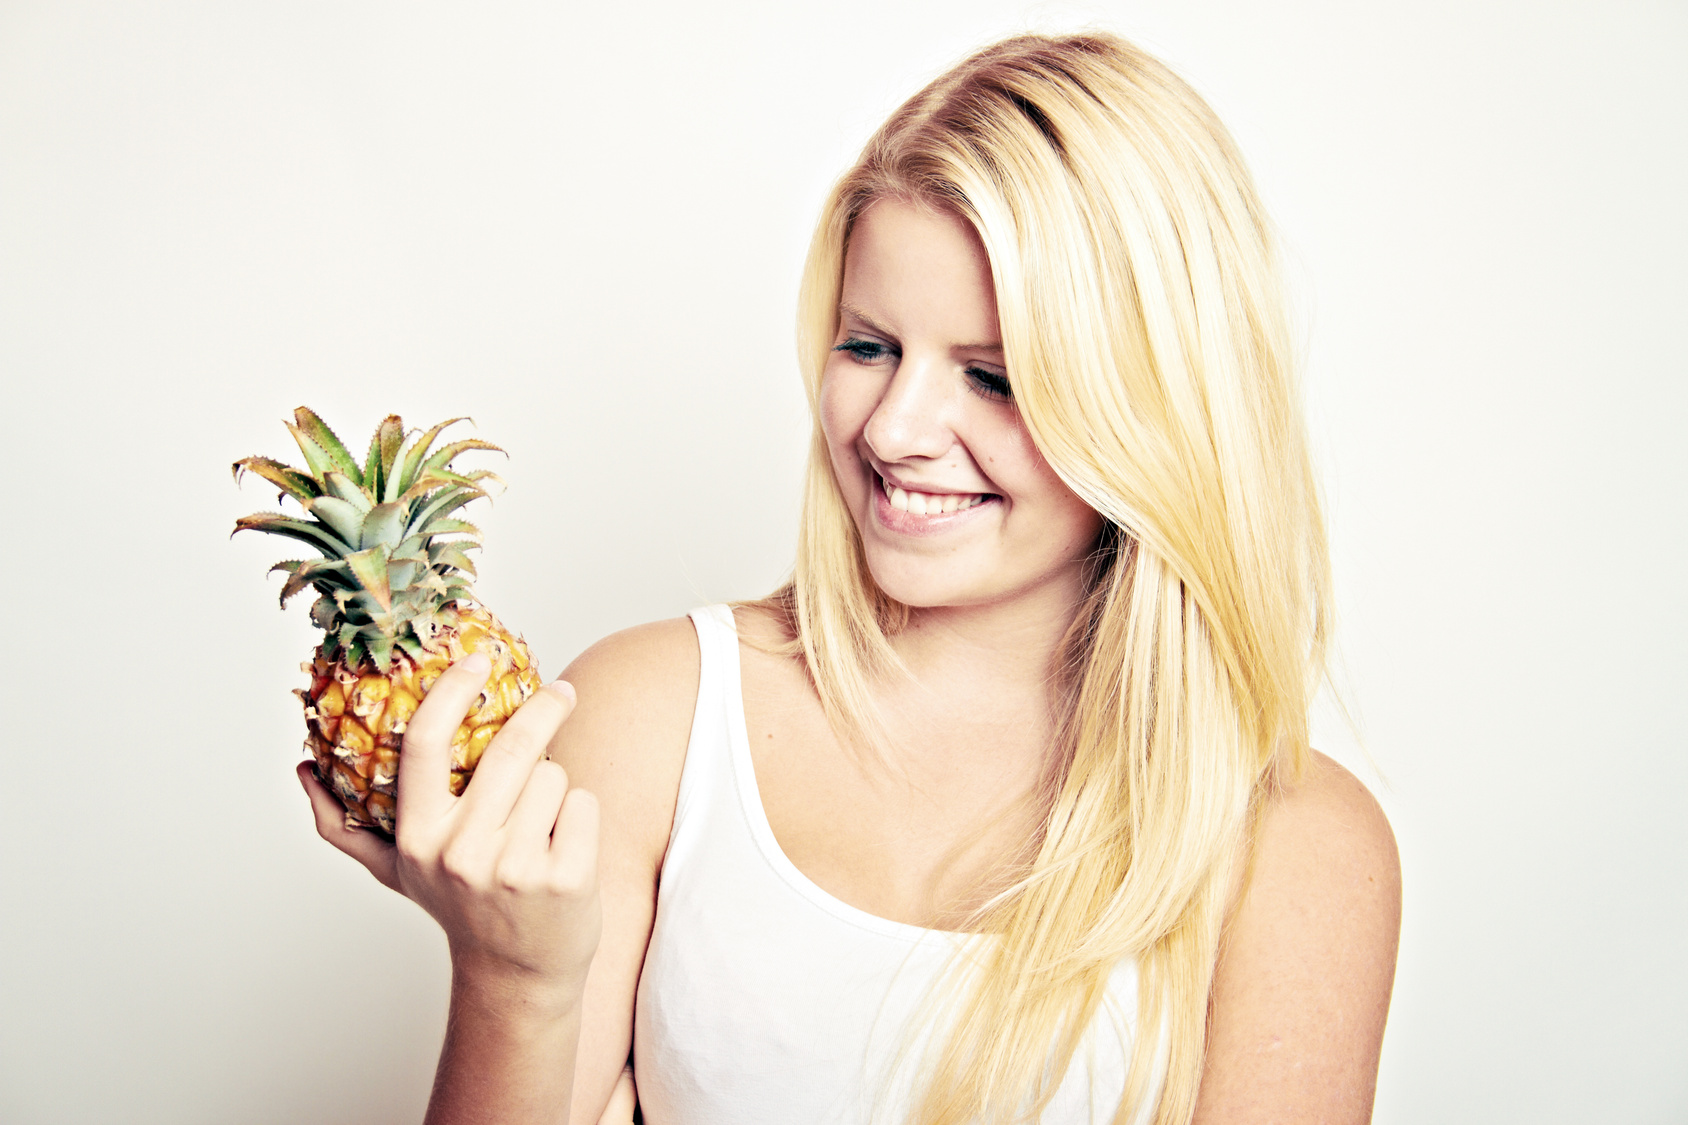 woman is holding a little pineapple